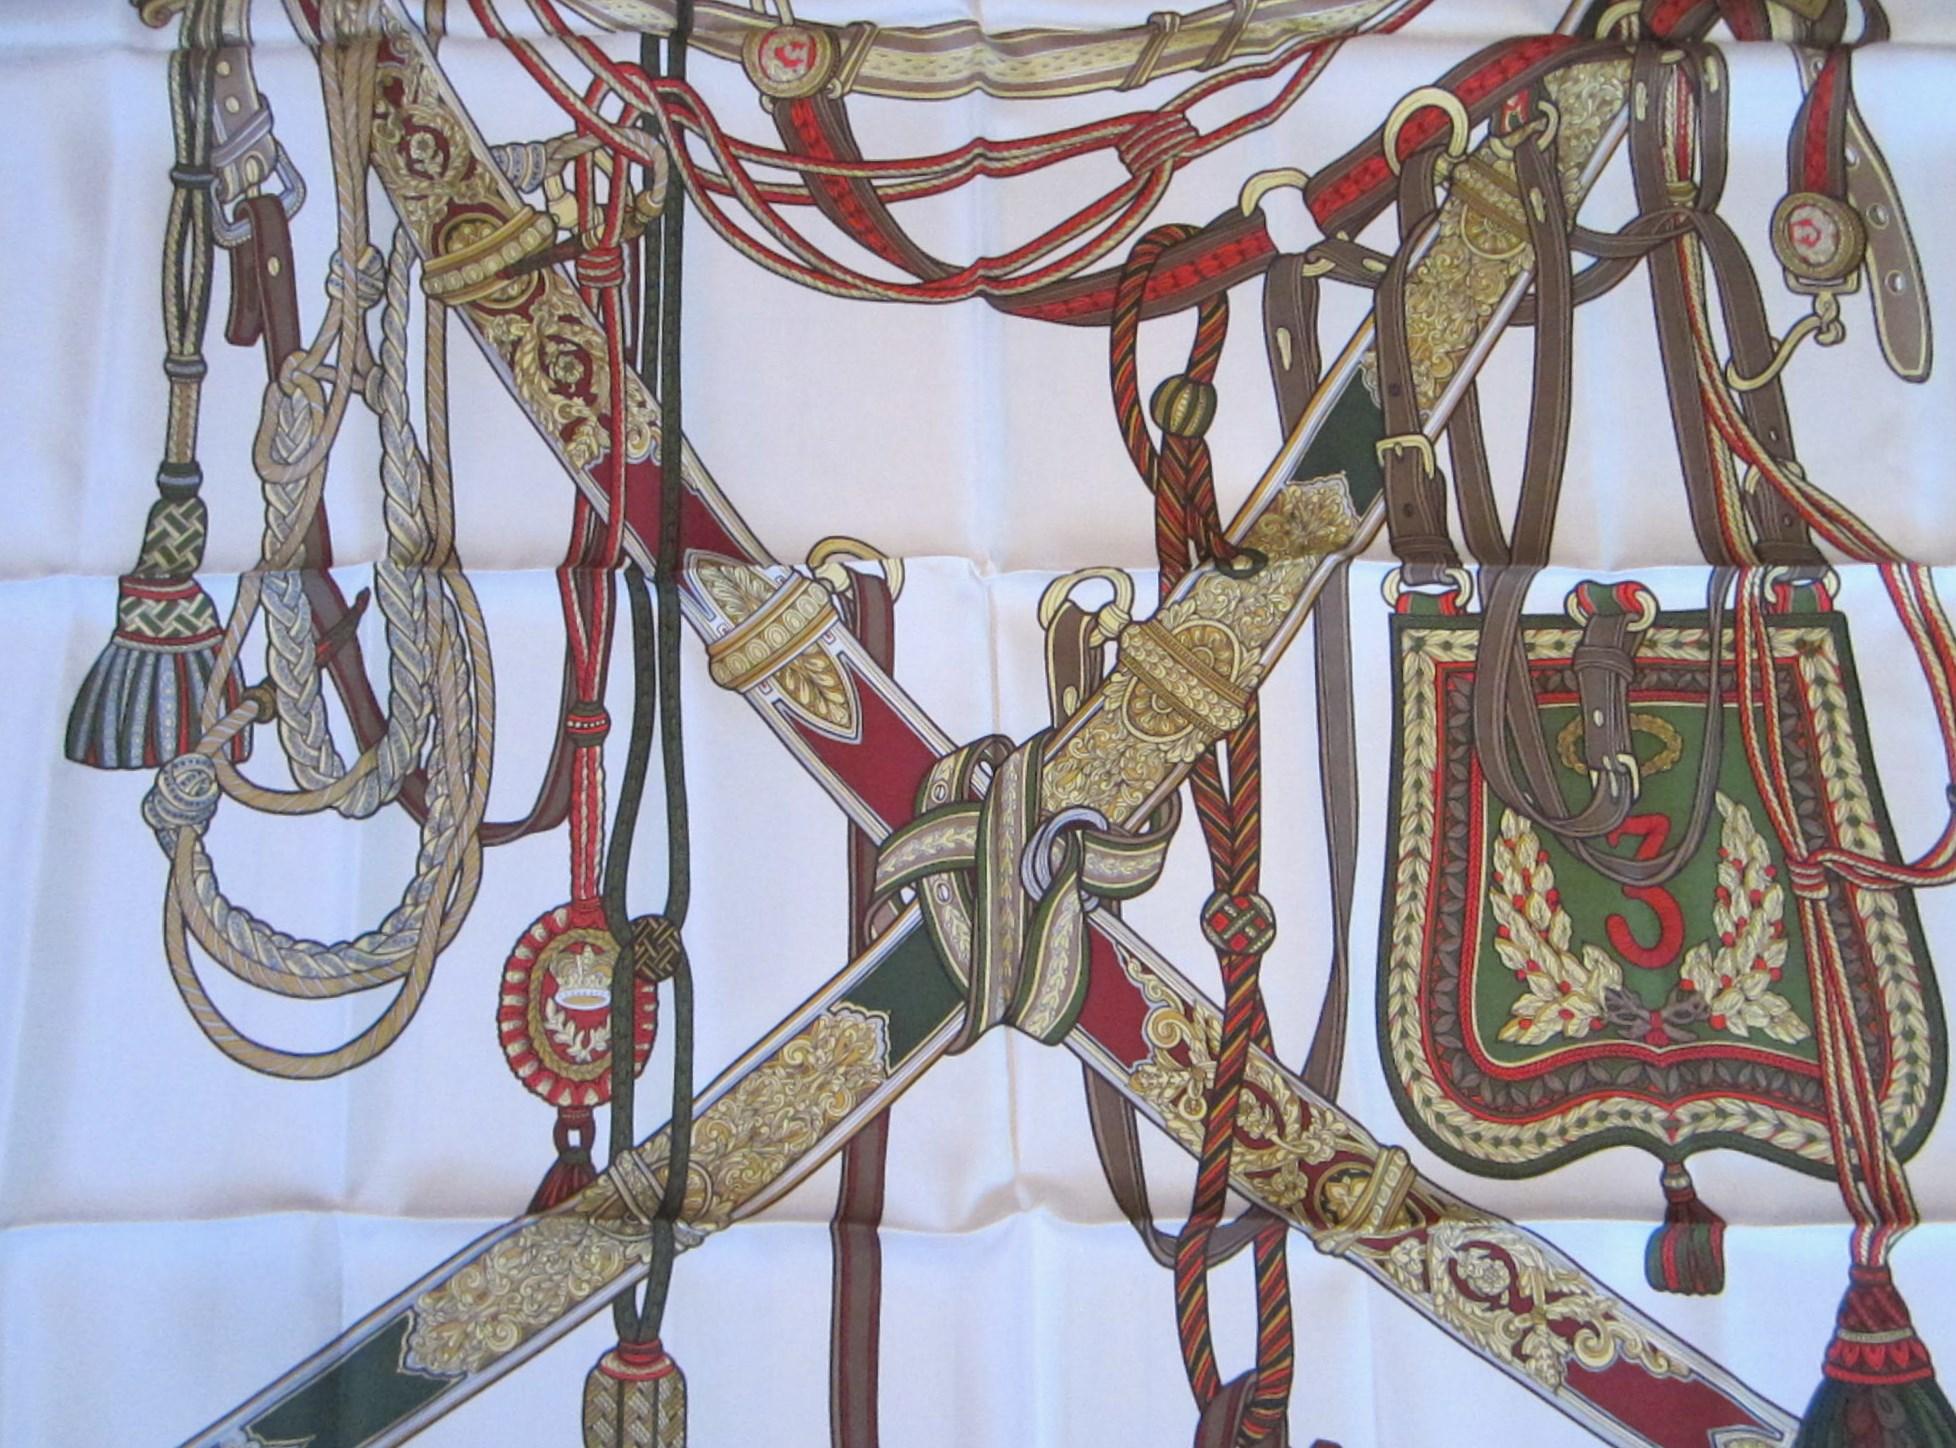 SALE 74cm x 74cm Vintage French Monnaies Anciennes square silk scarf mainly khaki green with gold images of ancient coins throughout